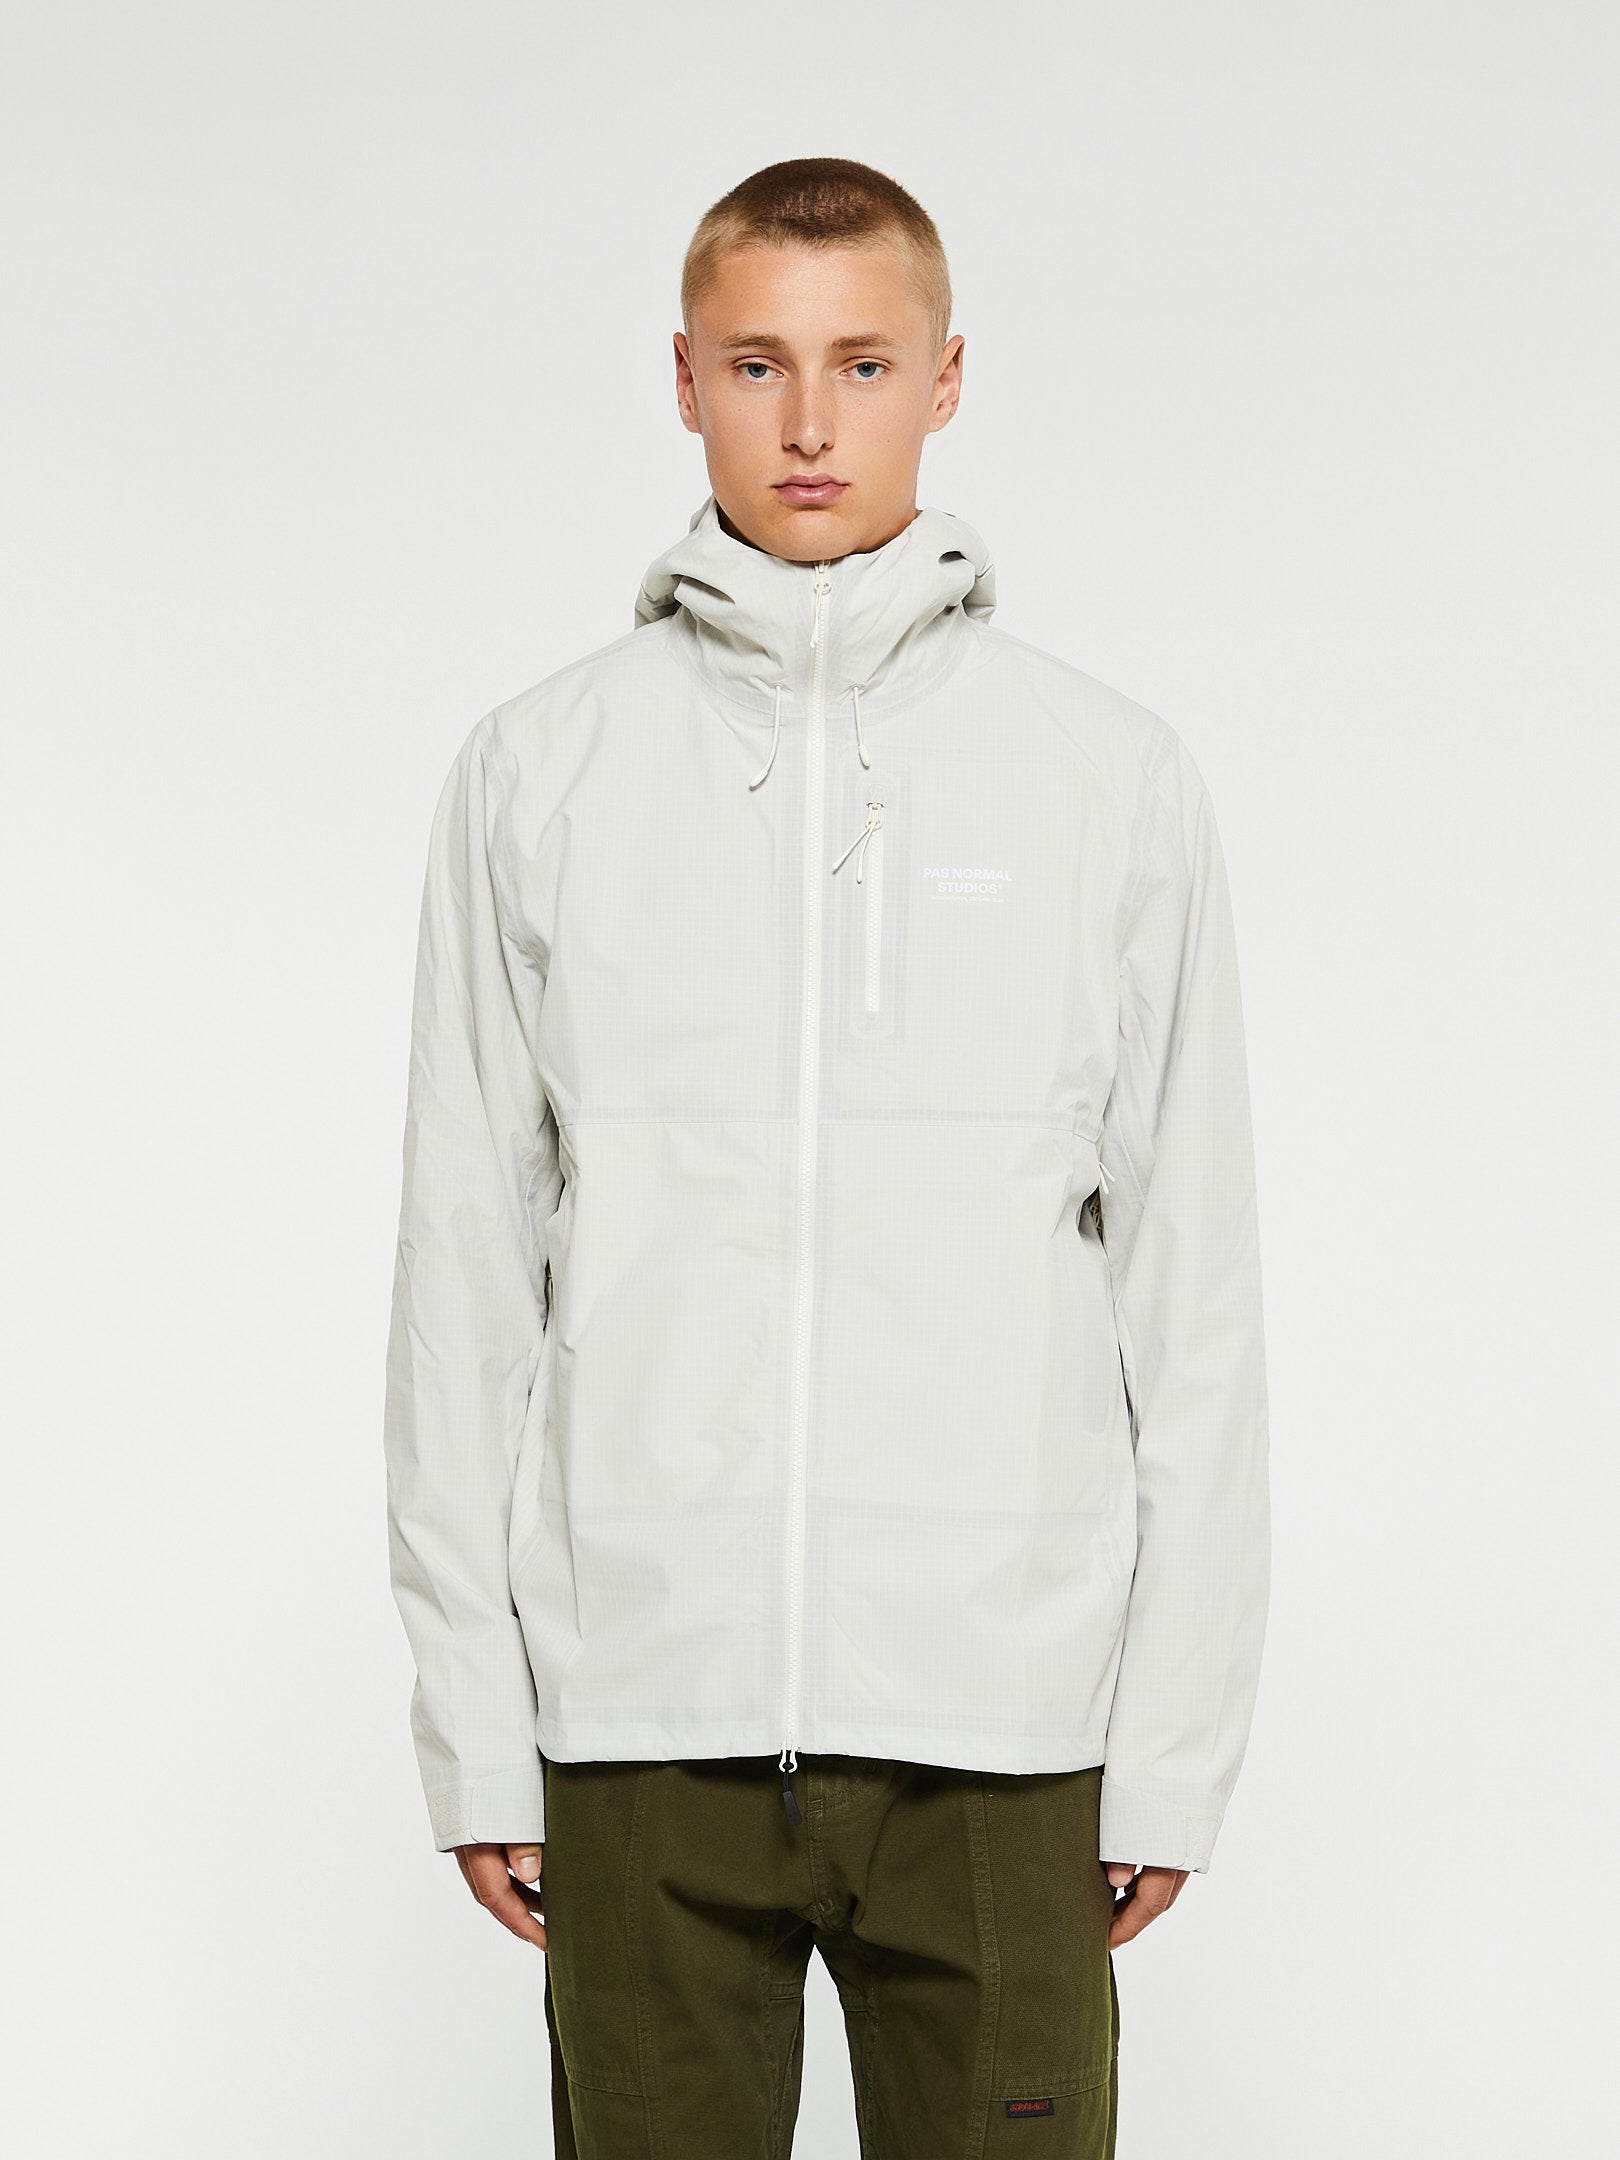 Pas Normal Studios - Off-Race Shell Jacket in Off White